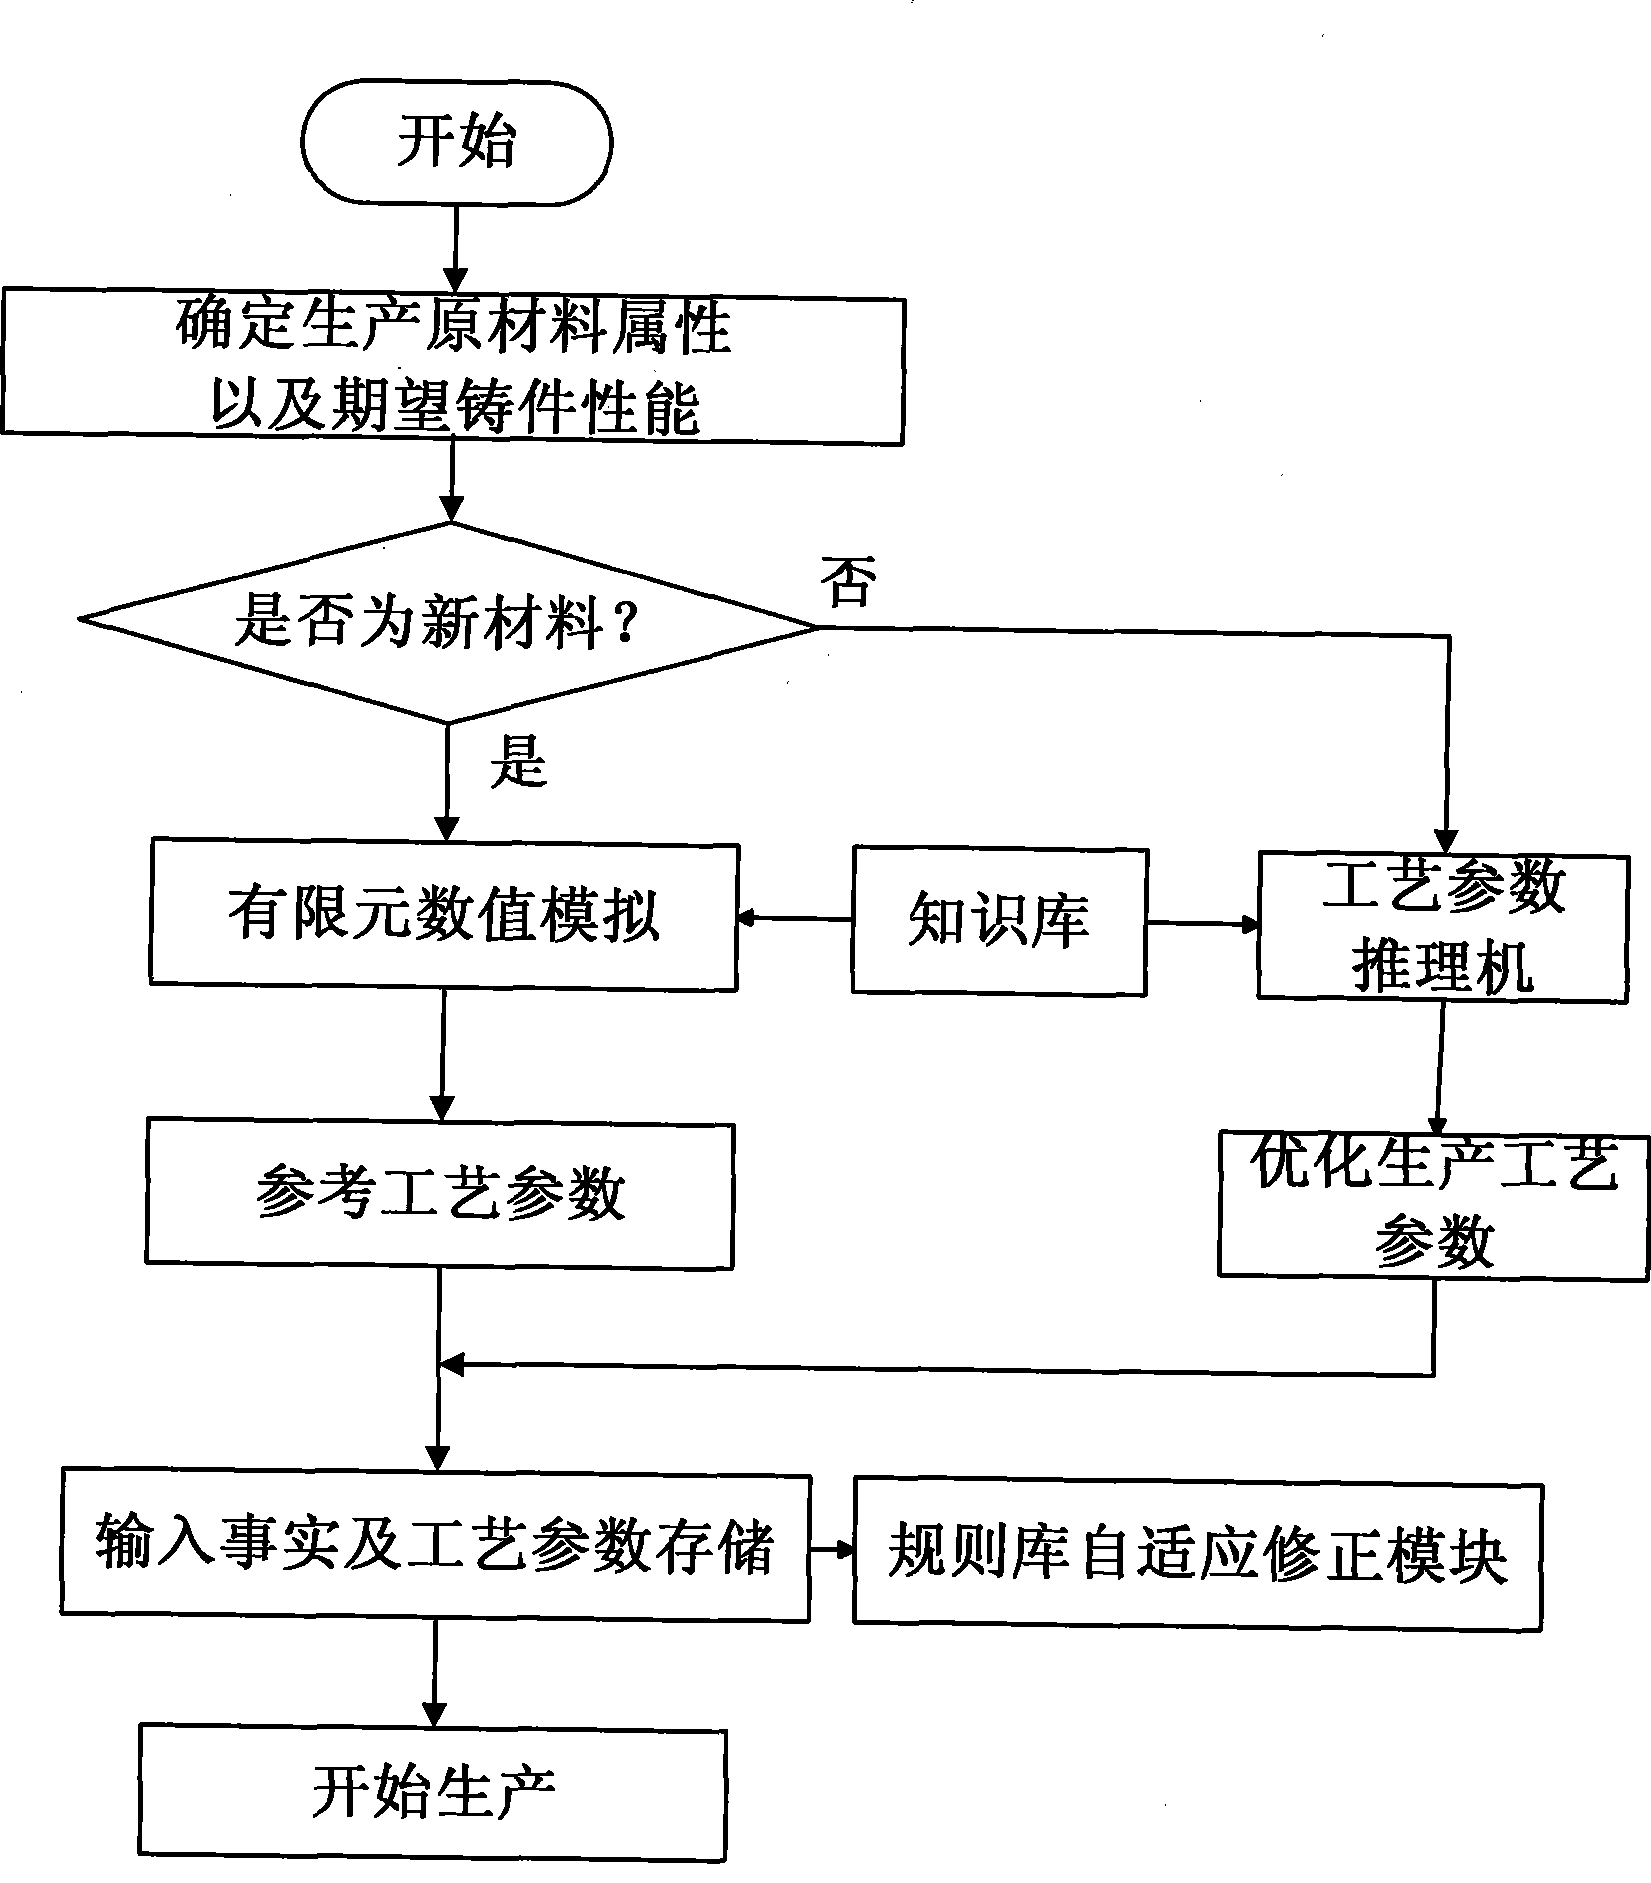 System and method suitable for quality control of reverse solidification technique